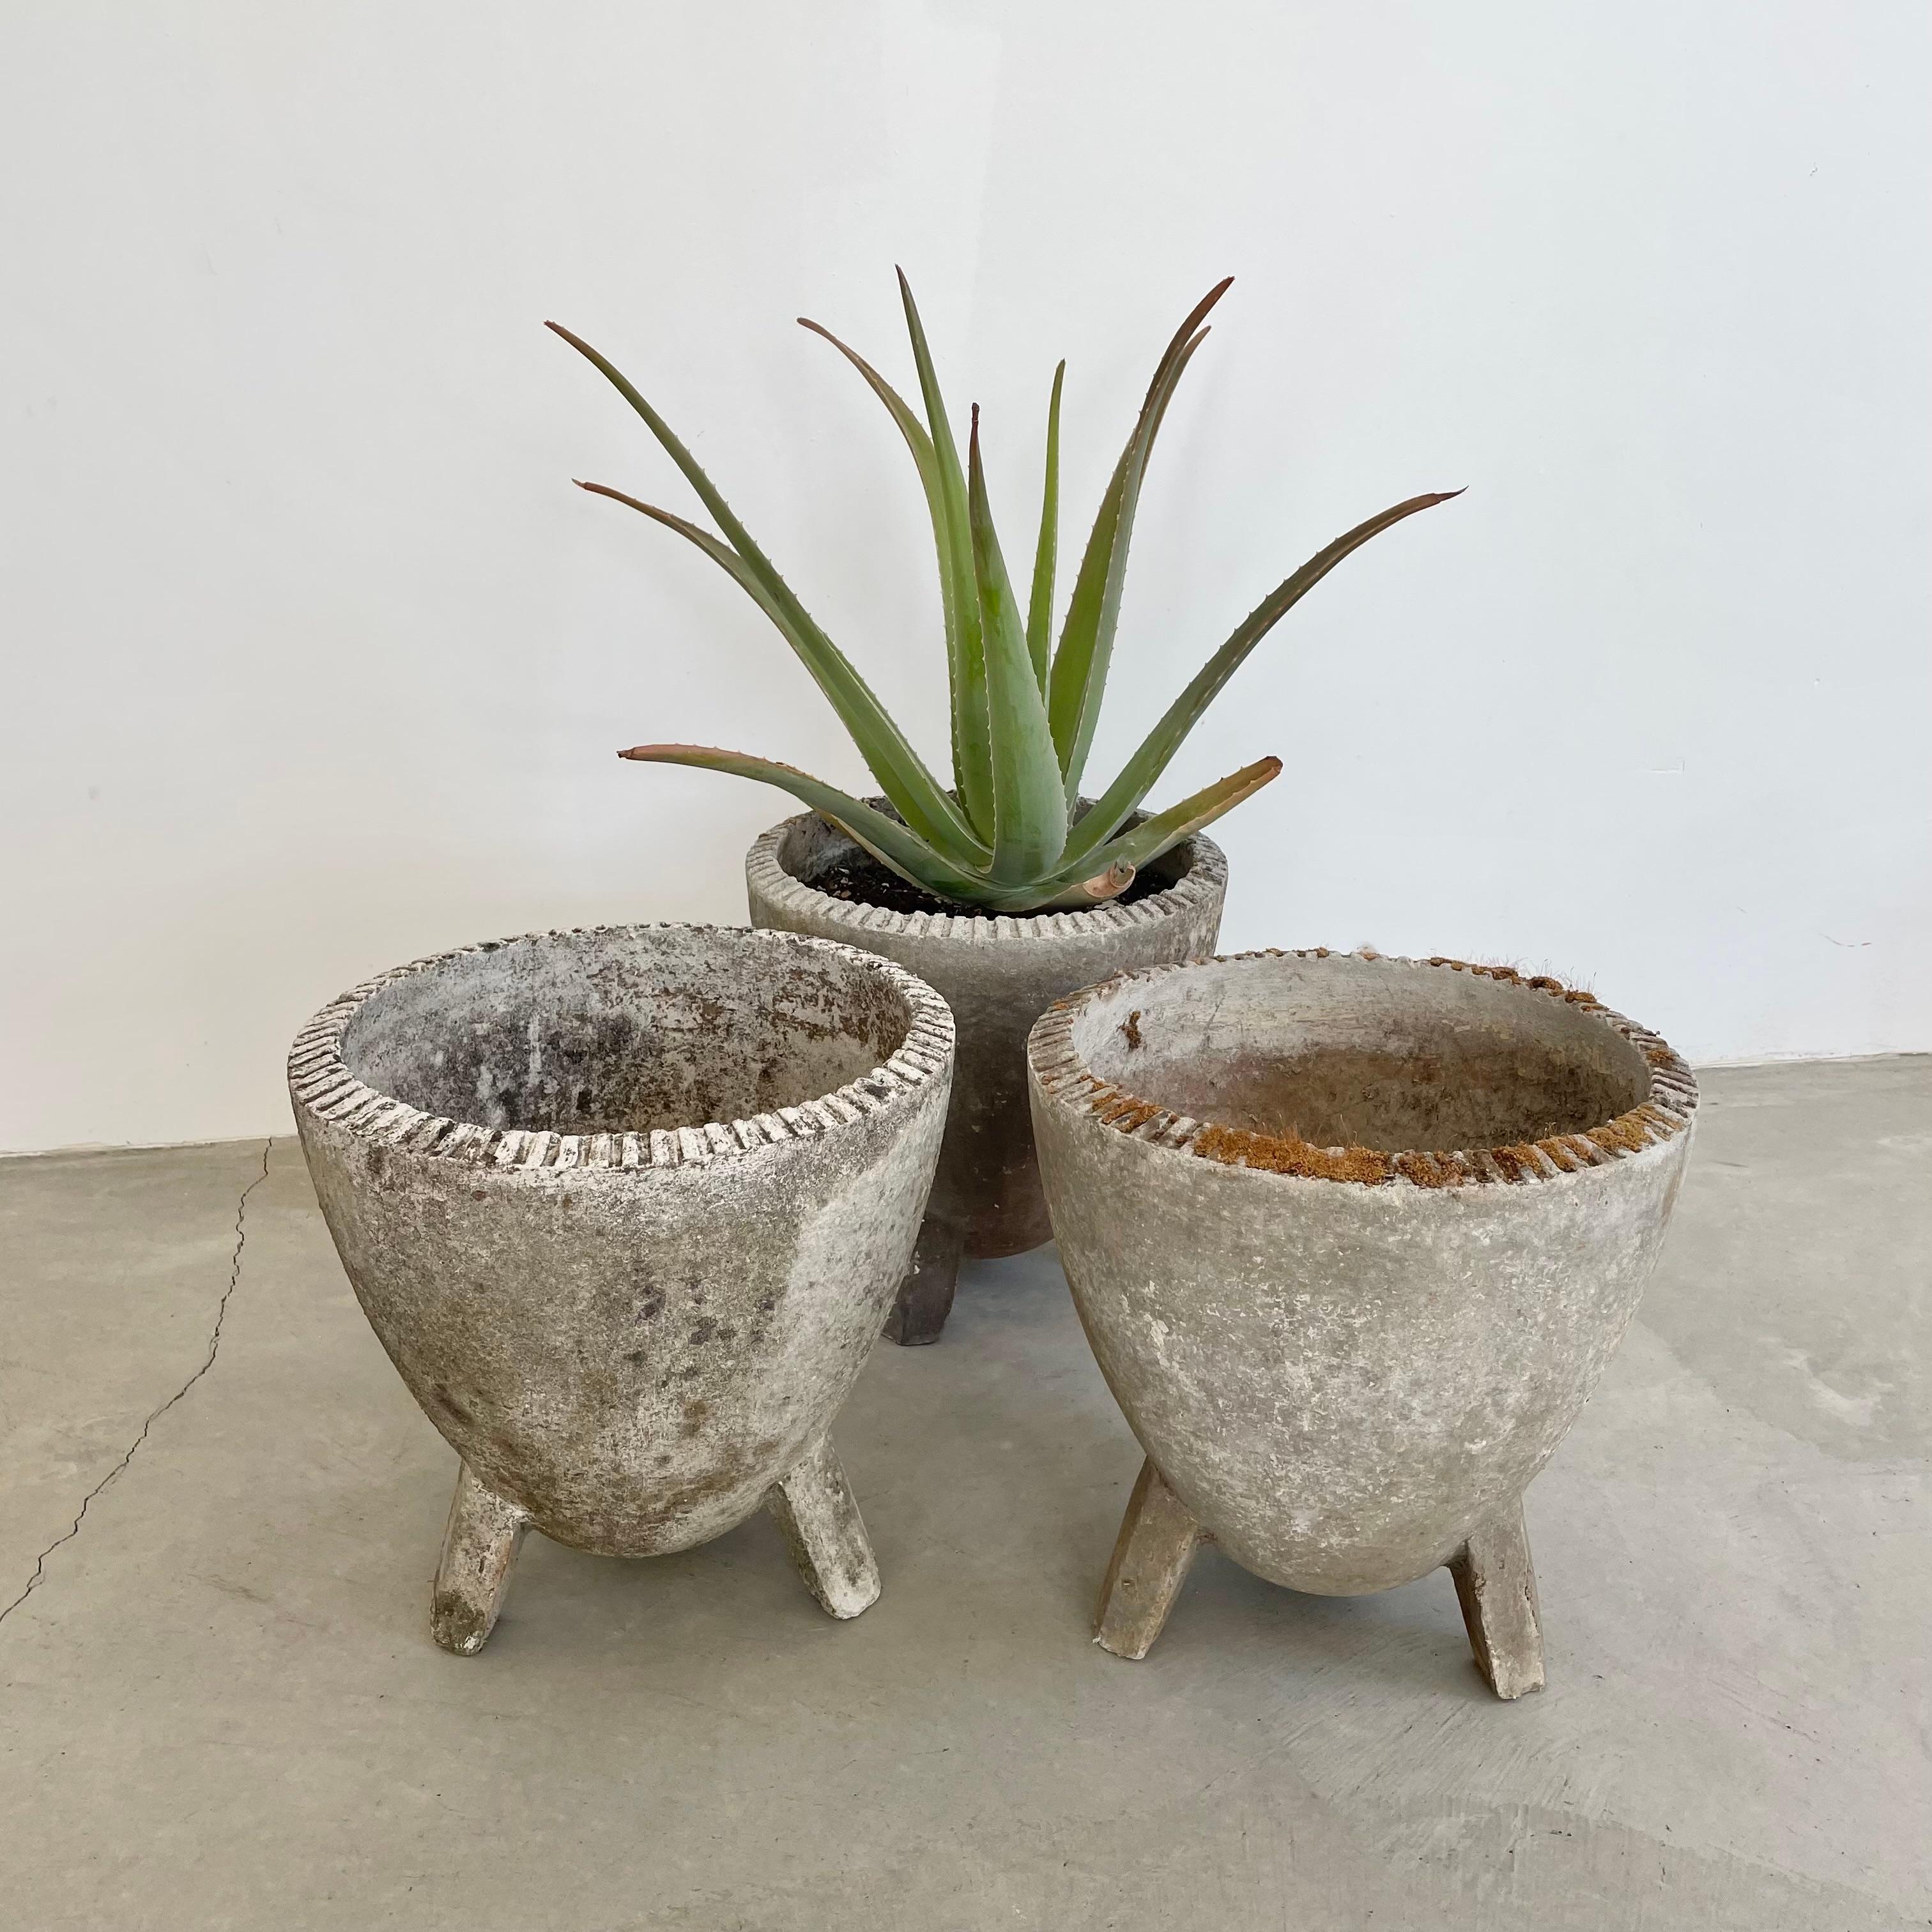 Rare and beautiful atomic concrete planters by Willy Guhl for Eternit. Heightened egg-shaped bowl with a three-legged base. Teeth ridges along the upper rim. Wonderful patina interspersed with moss and lichen. Factory drilled drainage holes at the